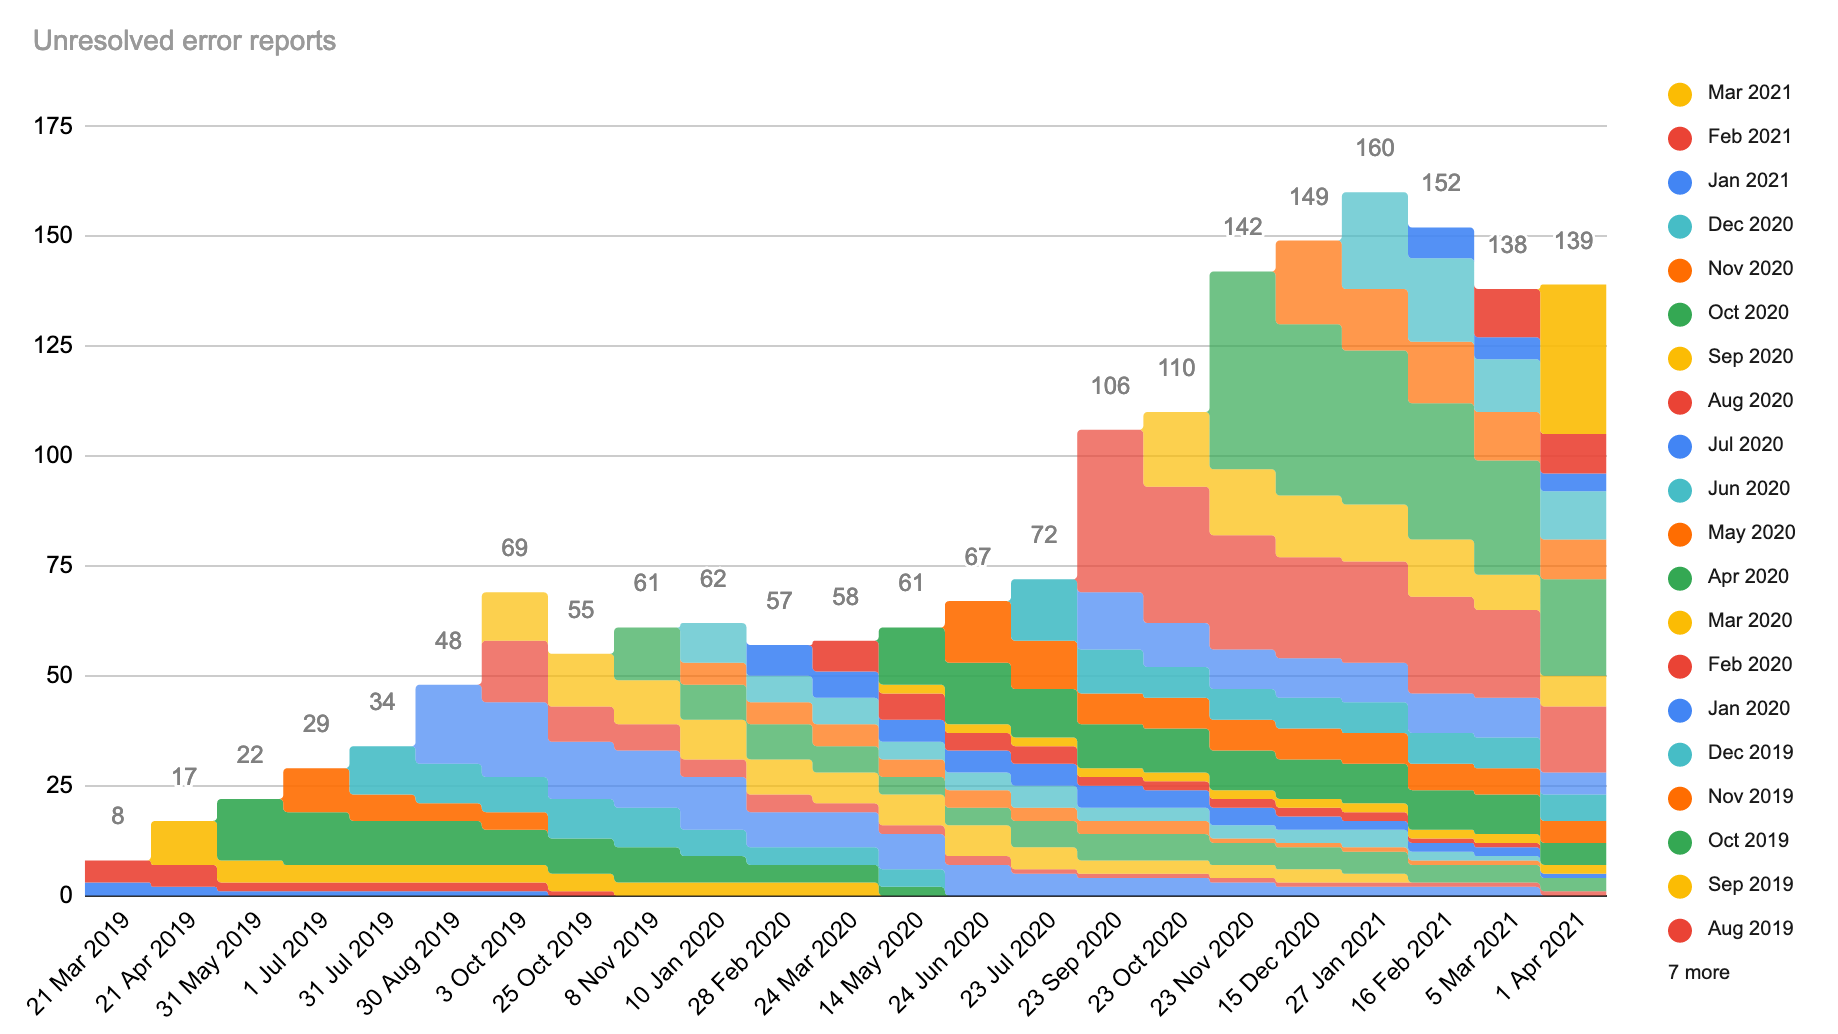 Unresolved error reports, stacked by month.